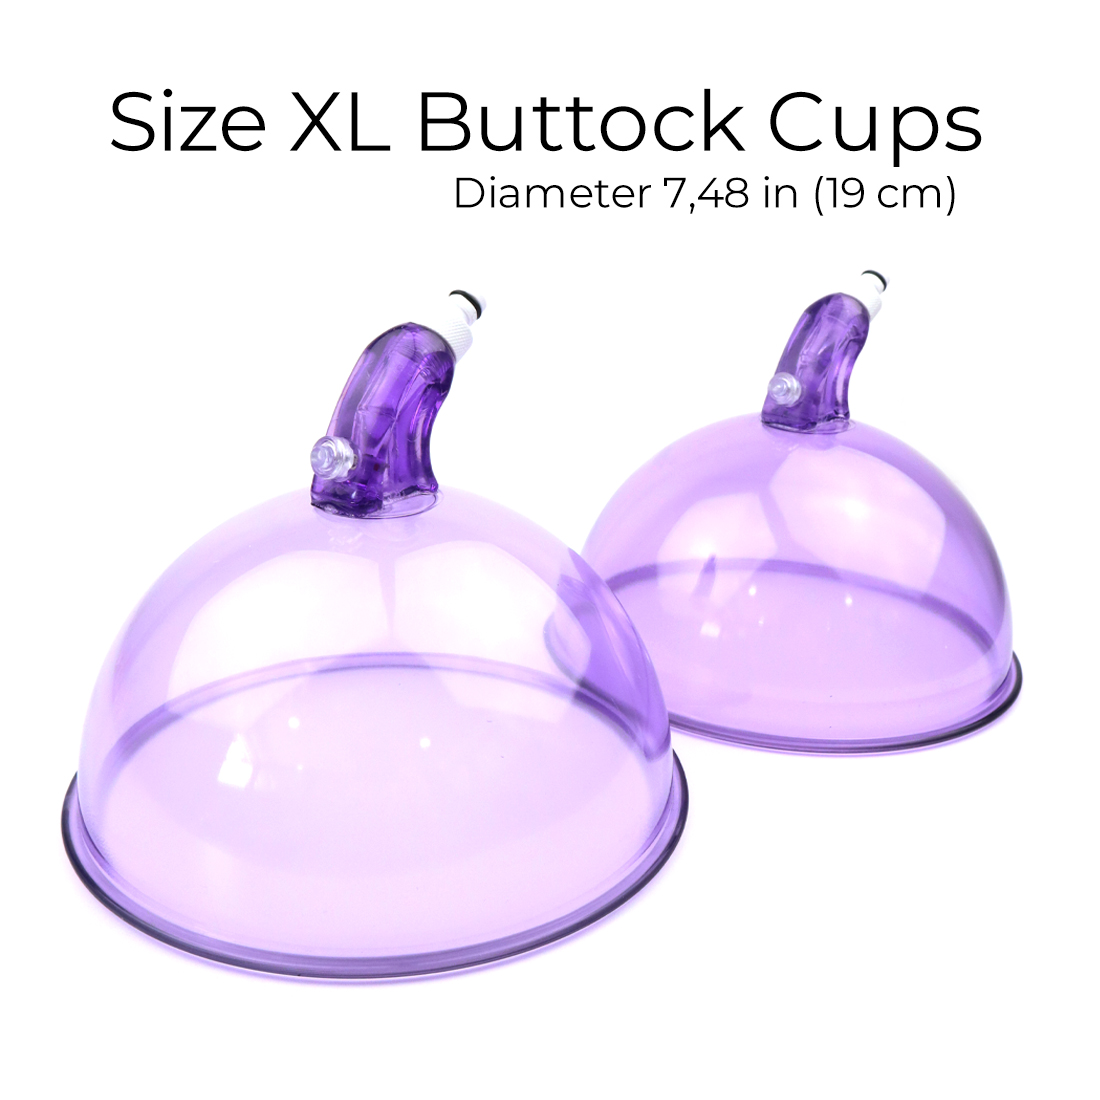 Combo Size L and XL Colombian Lifting Buttocks Cups -  Canada